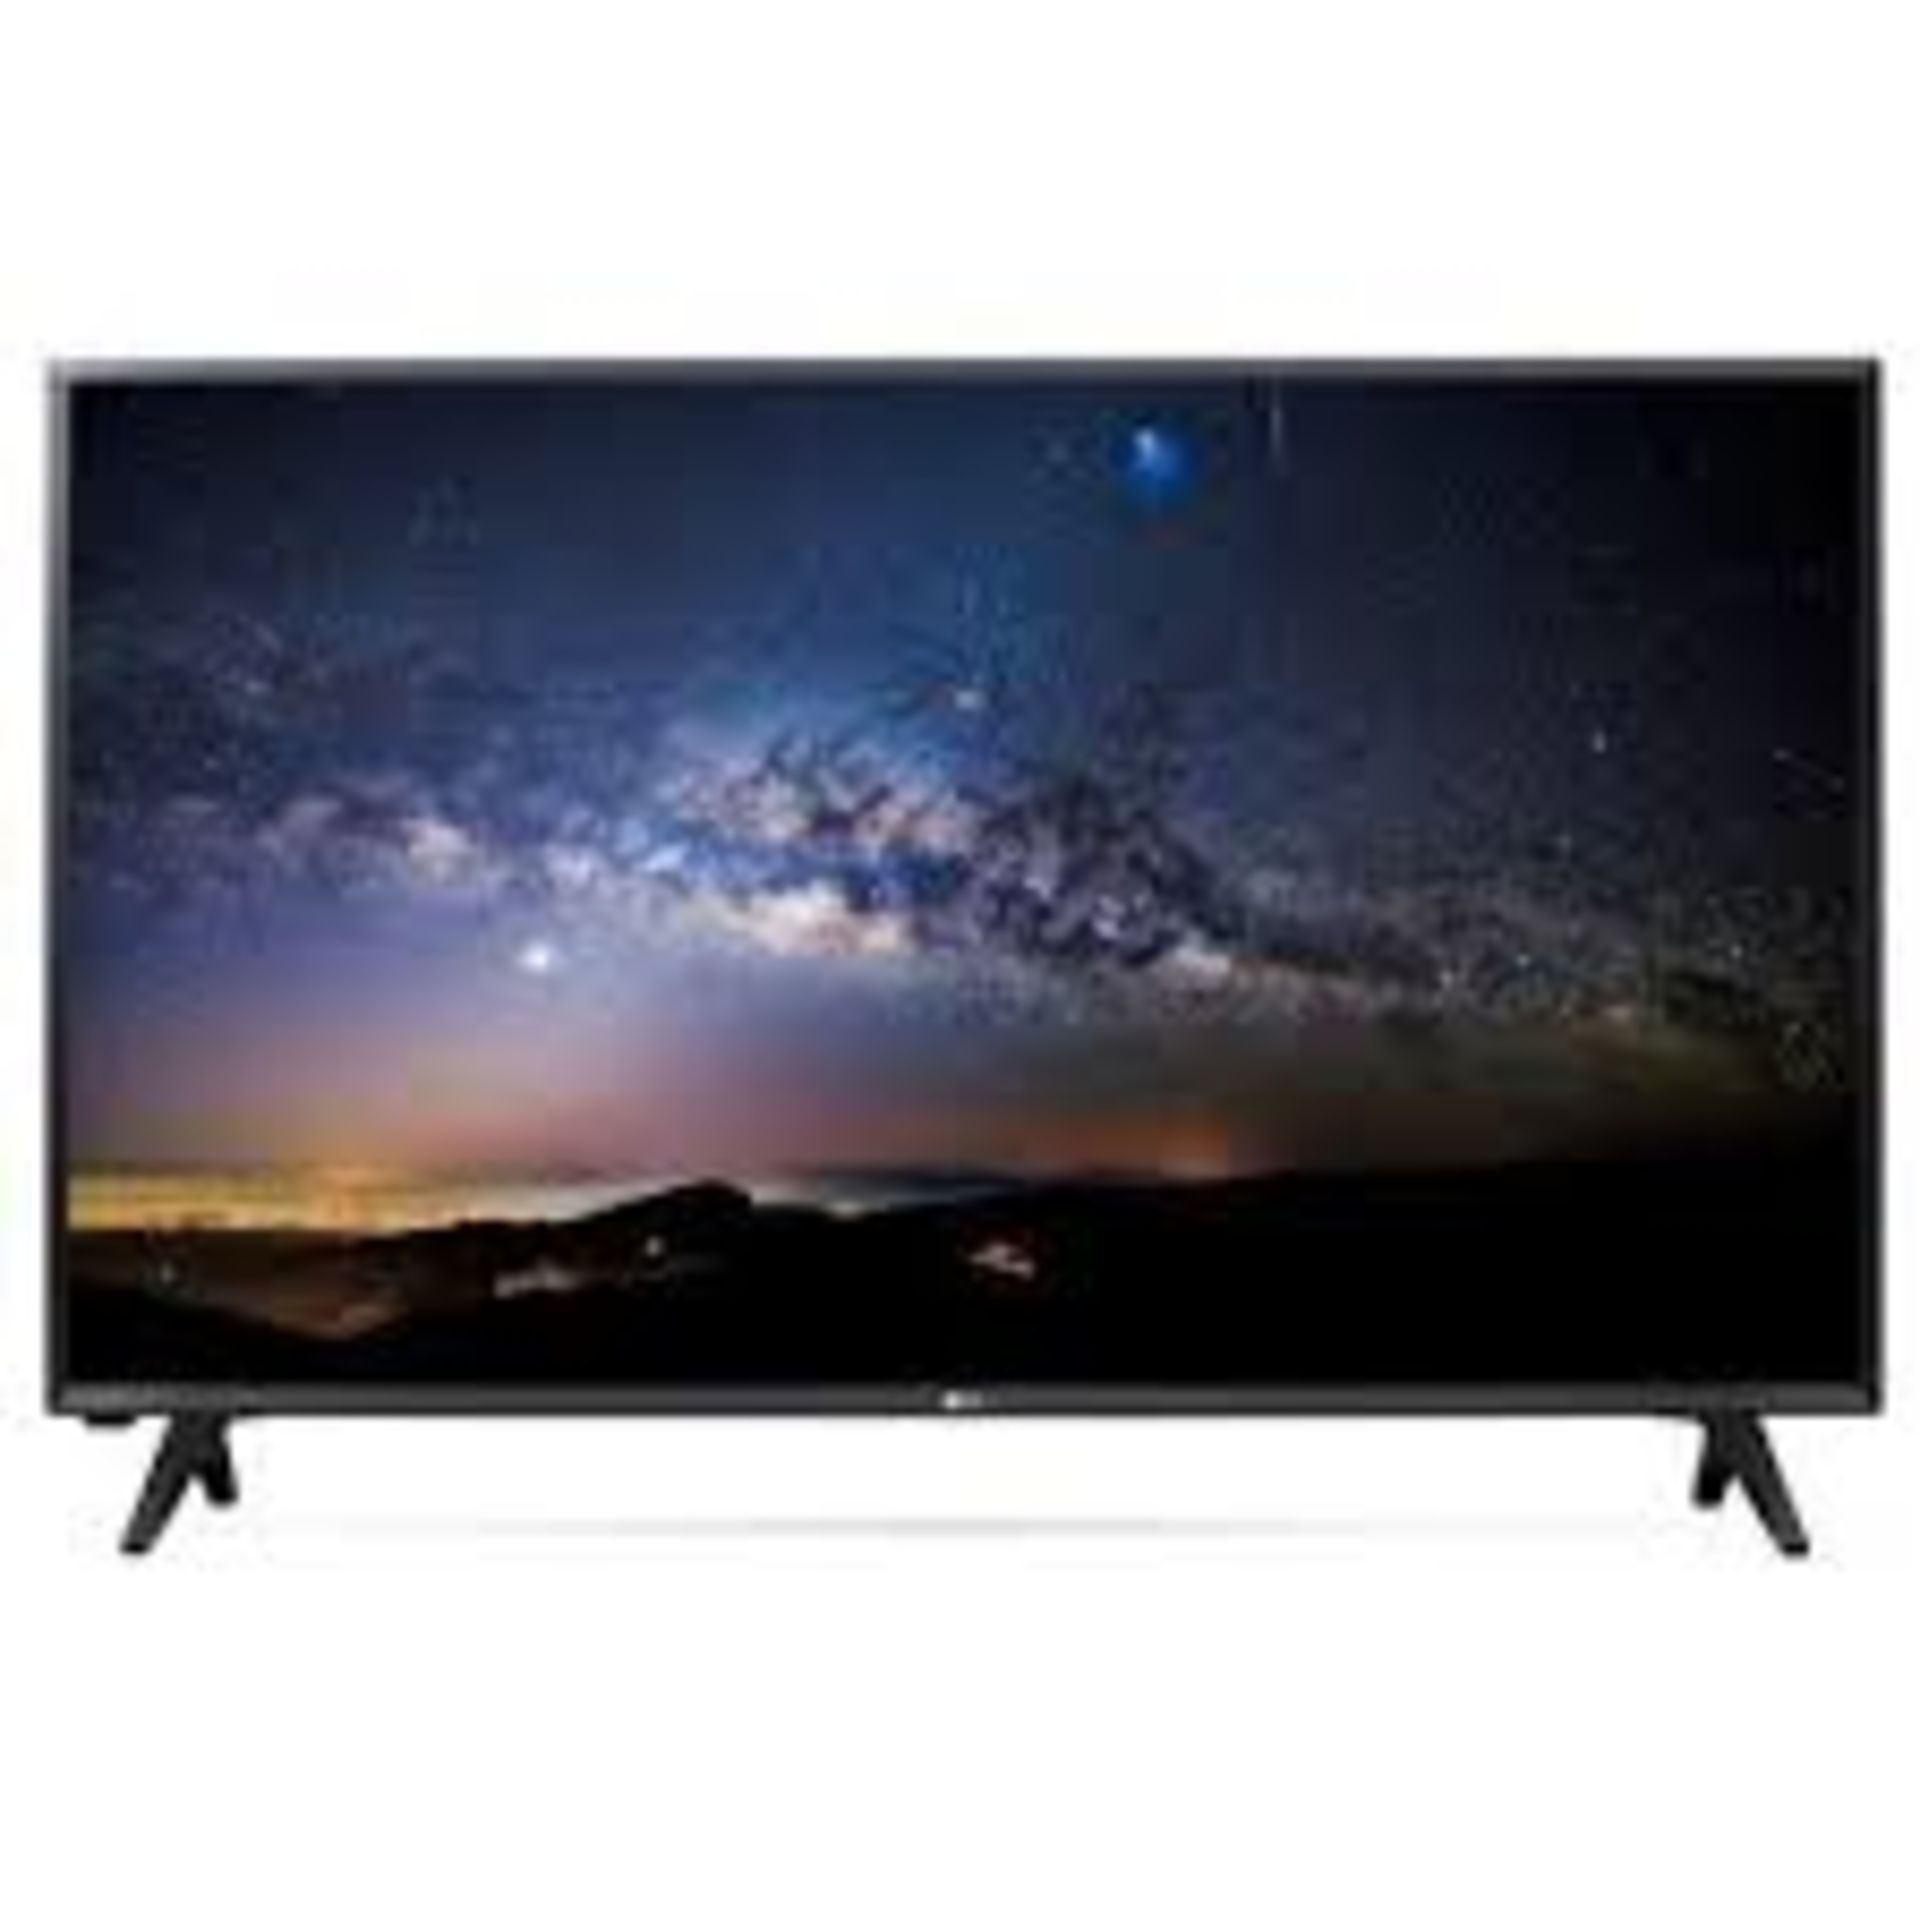 V Grade A LG 32 Inch HD READY LED TV WITH FREEVIEW HD32LK500BPLA